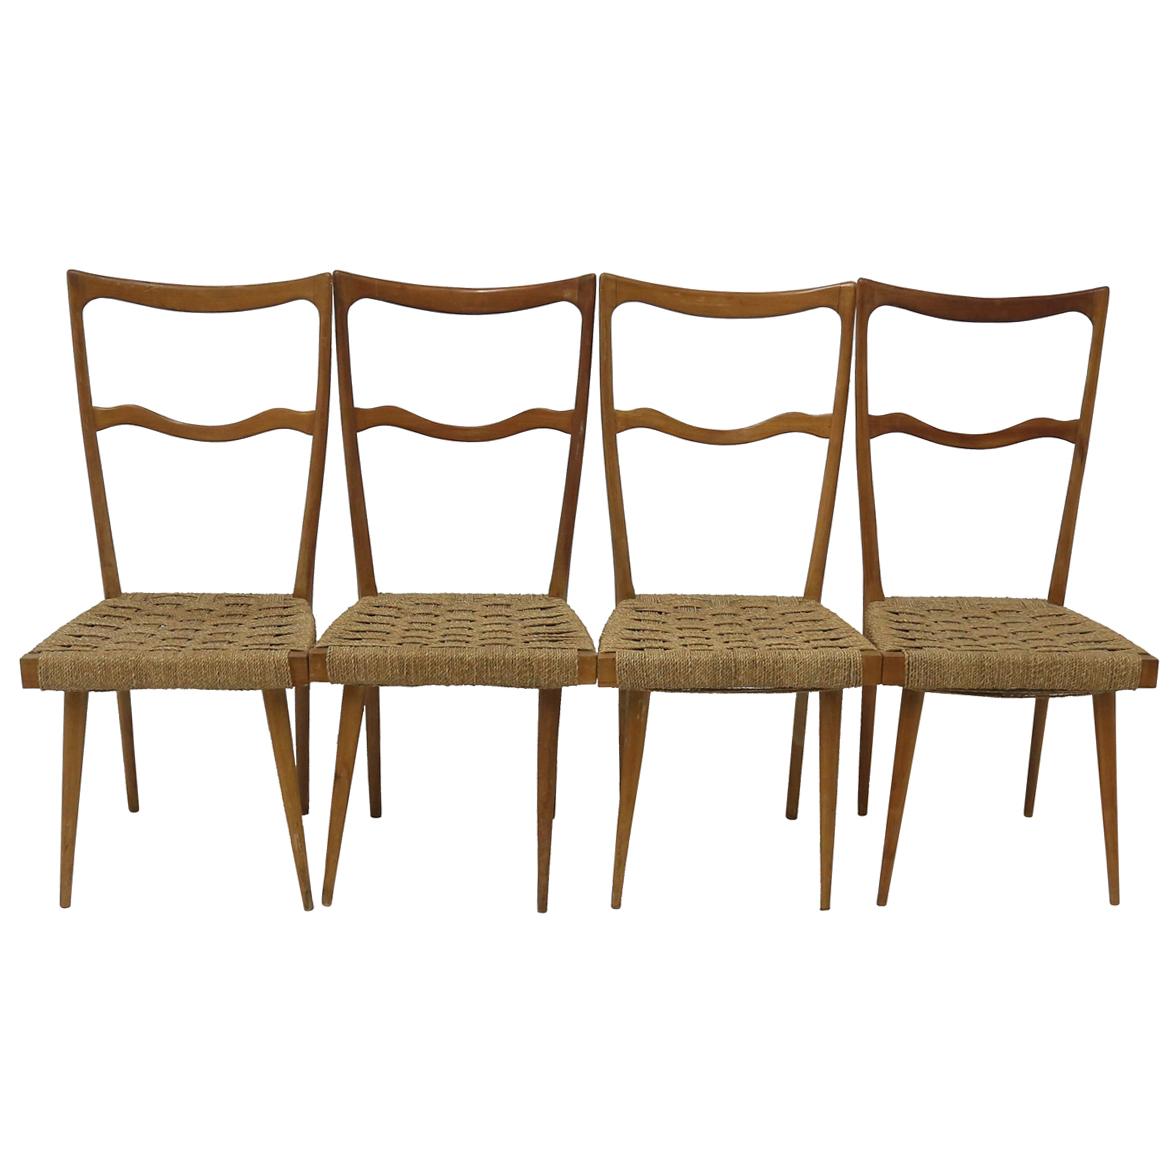 Set of 4 wood Italian ladder back chairs with wood frames and woven rush seats. In the manner of Gio Ponti.